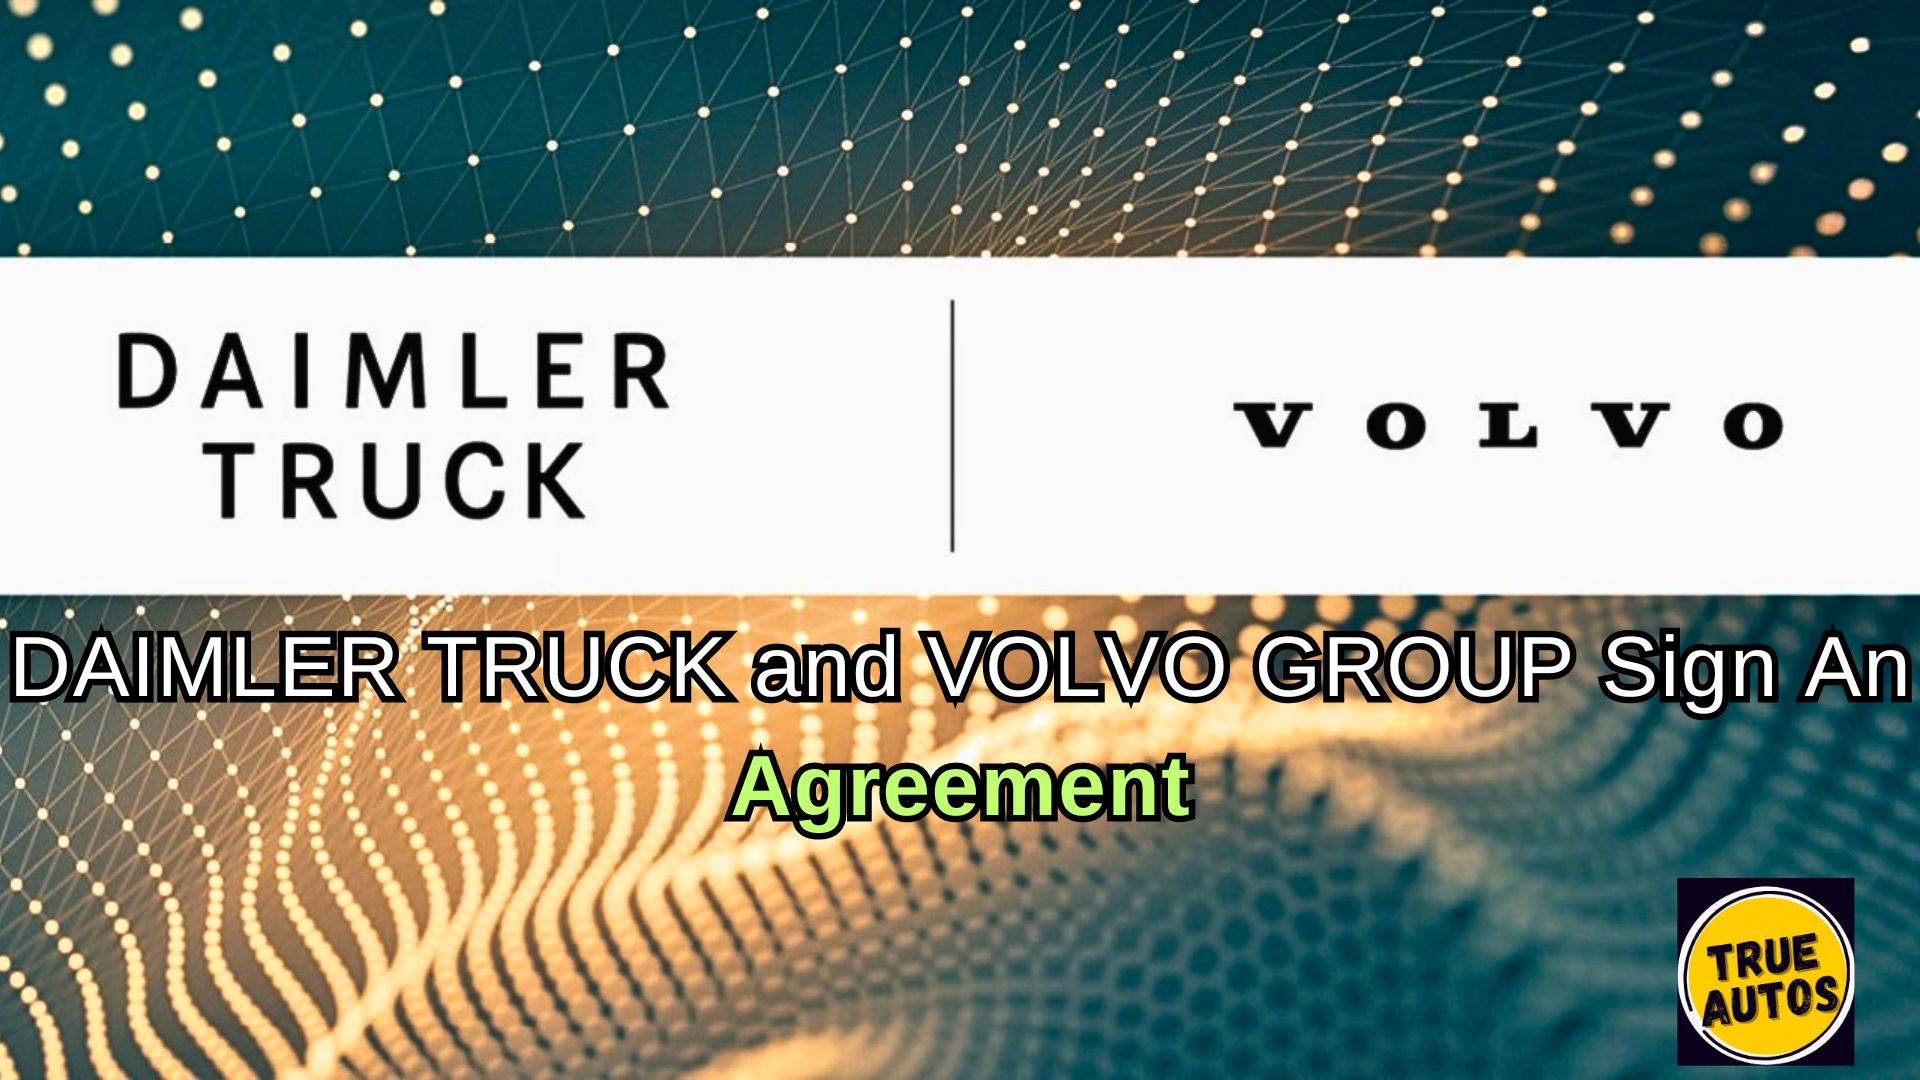 Daimler Truck and Volvo Group